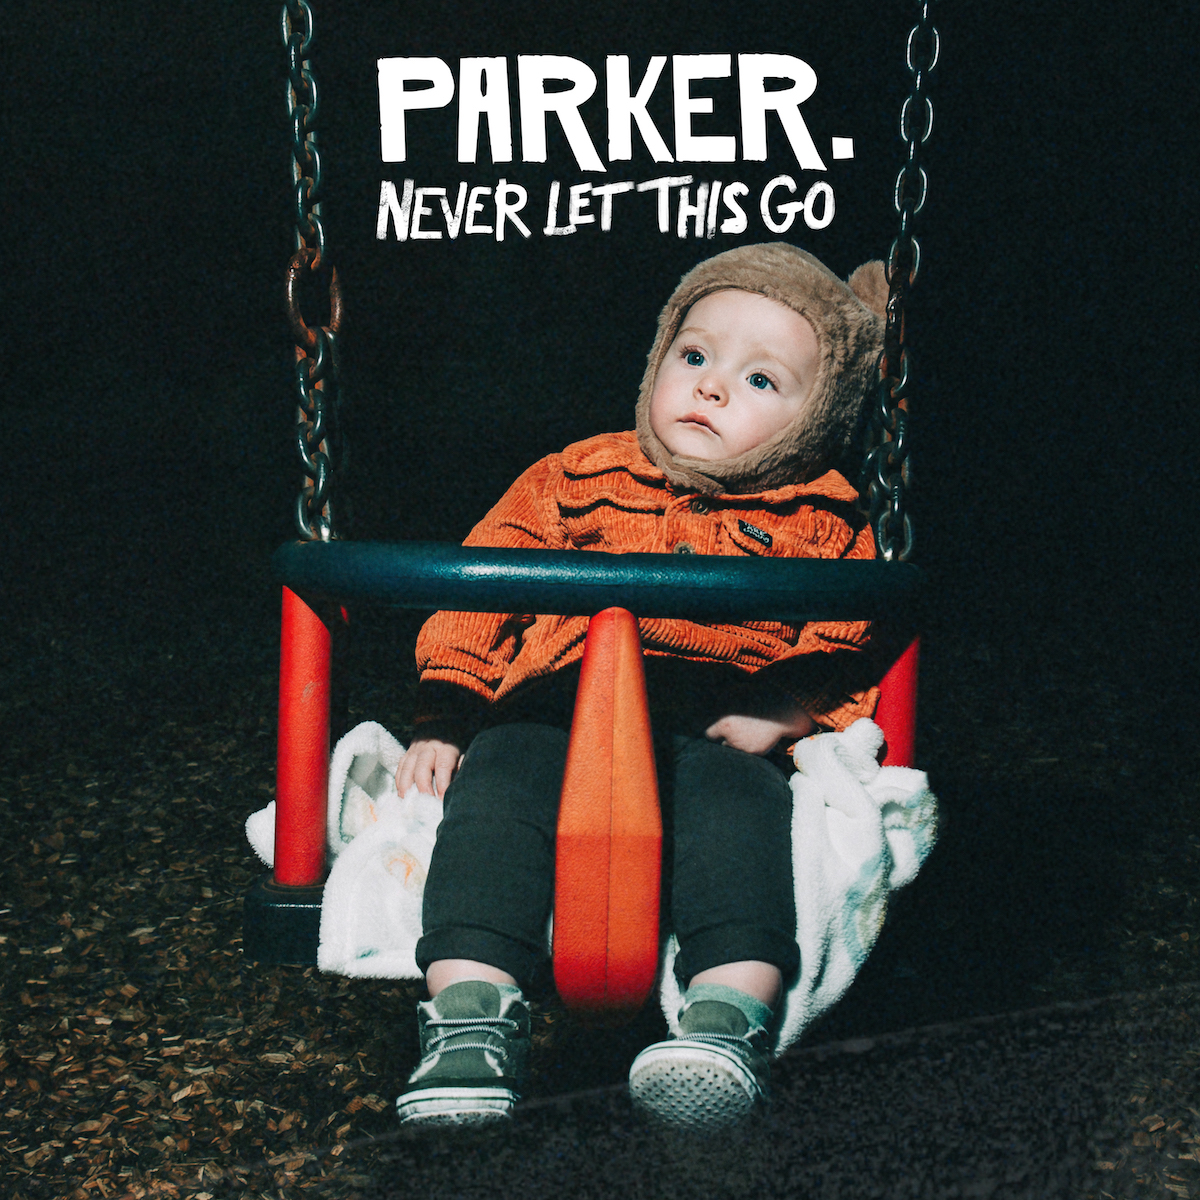 DEBUT ALBUM REVIEW: Never Let this Go by Parker